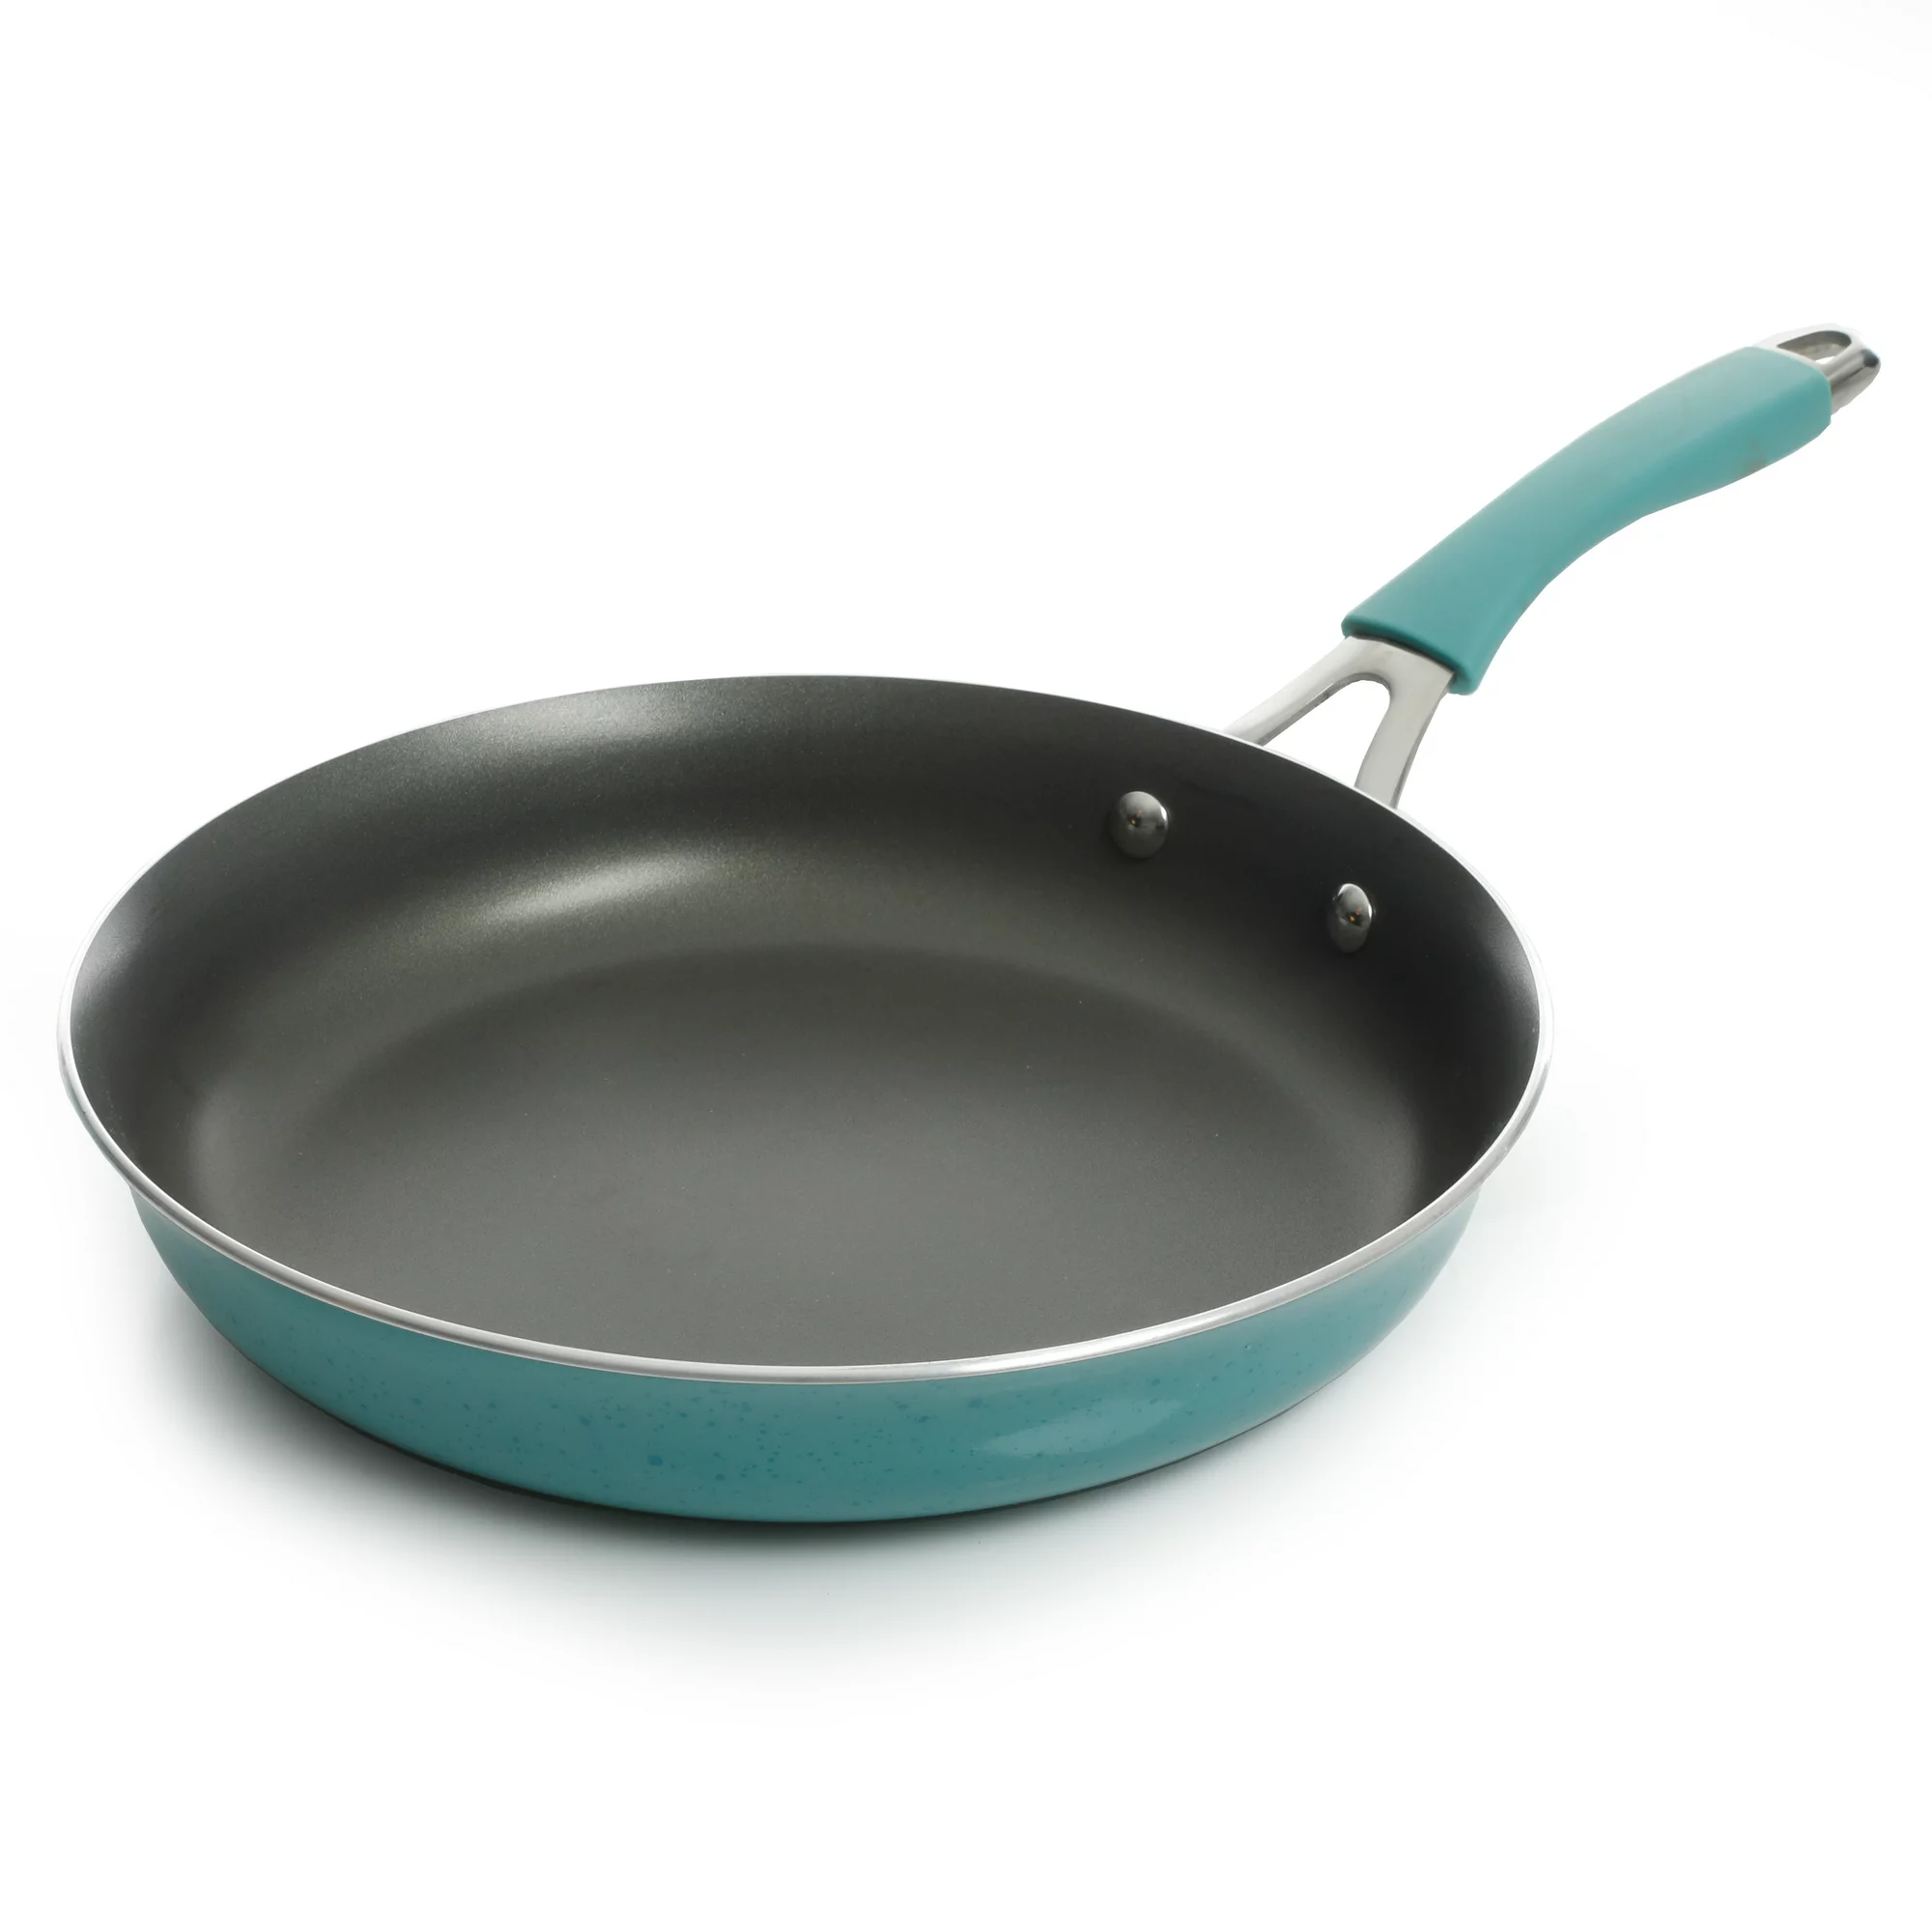 The Pioneer Woman Frontier Speckle Aluminum 10-Piece Cookware Set, Turquoise